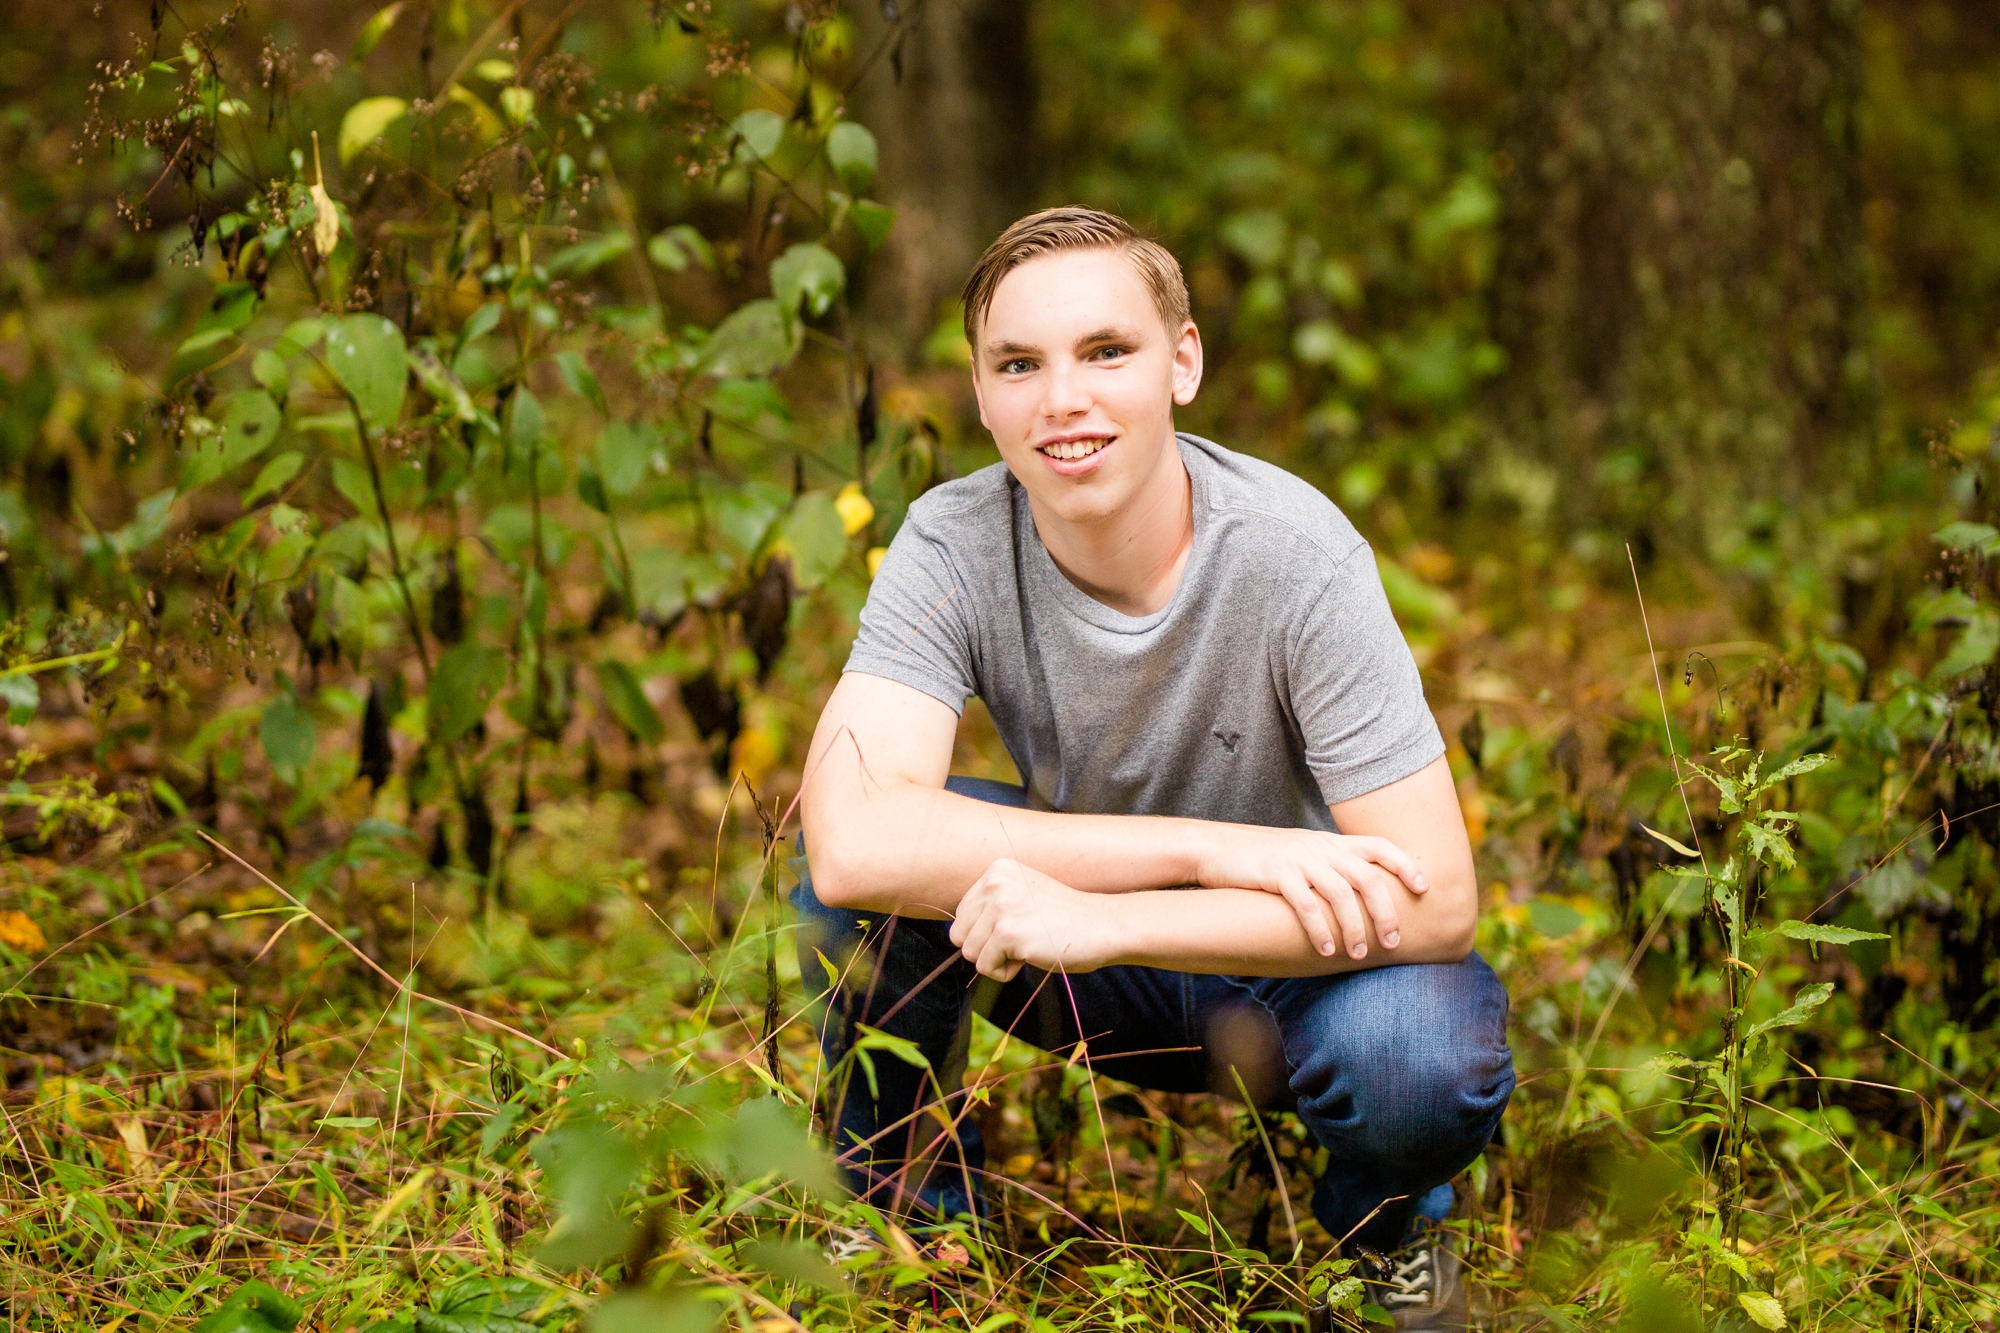 cranberry township senior photos, best places for senior photos in pittsburgh, best locations for senior photos in pittsburgh, pittsburgh senior photographer, cranberry township senior photographer